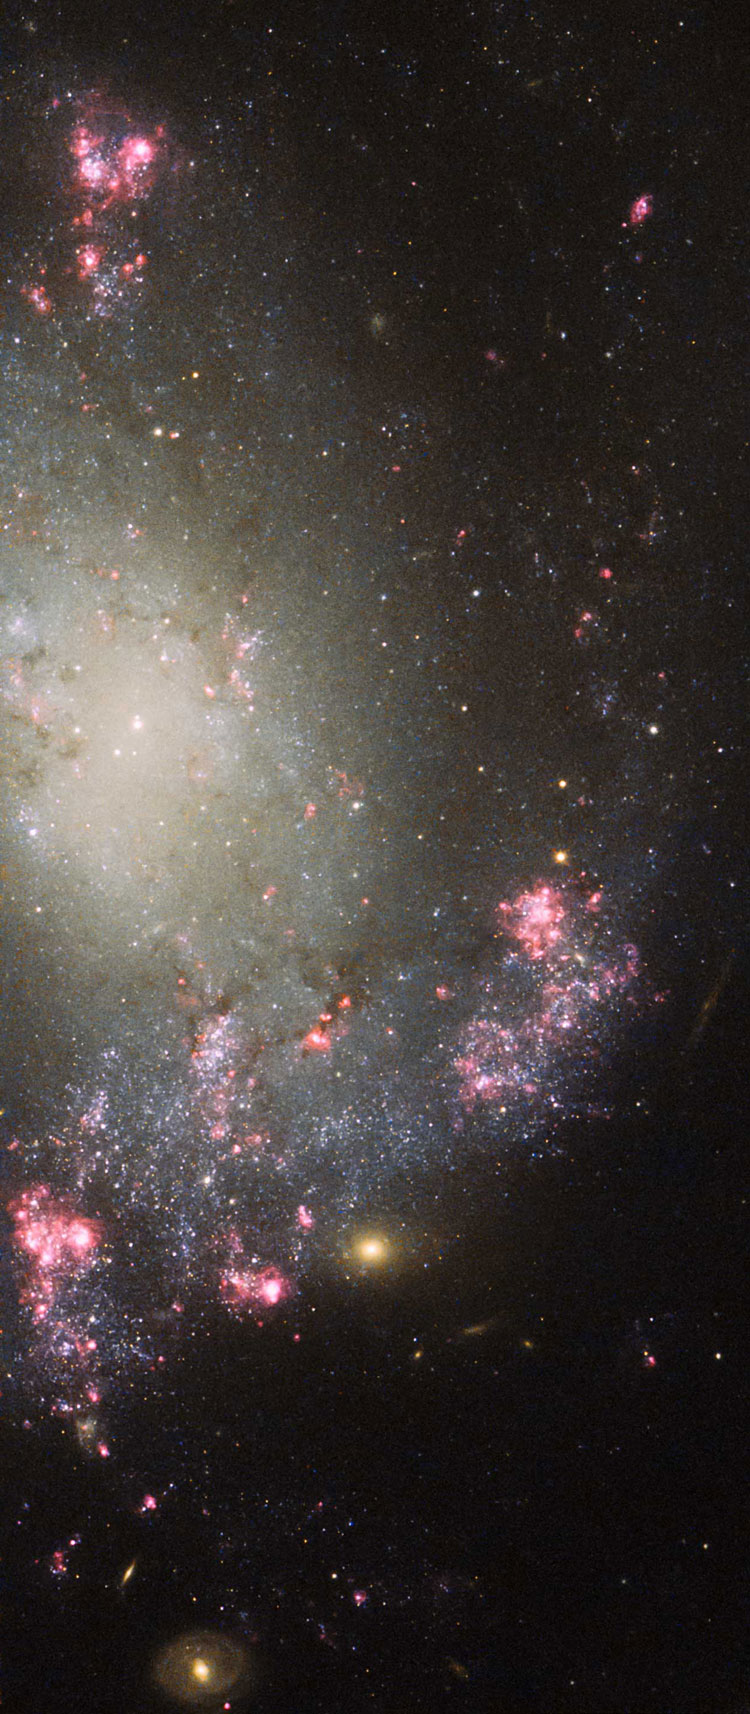 HST image of northern half of spiral galaxy NGC 428